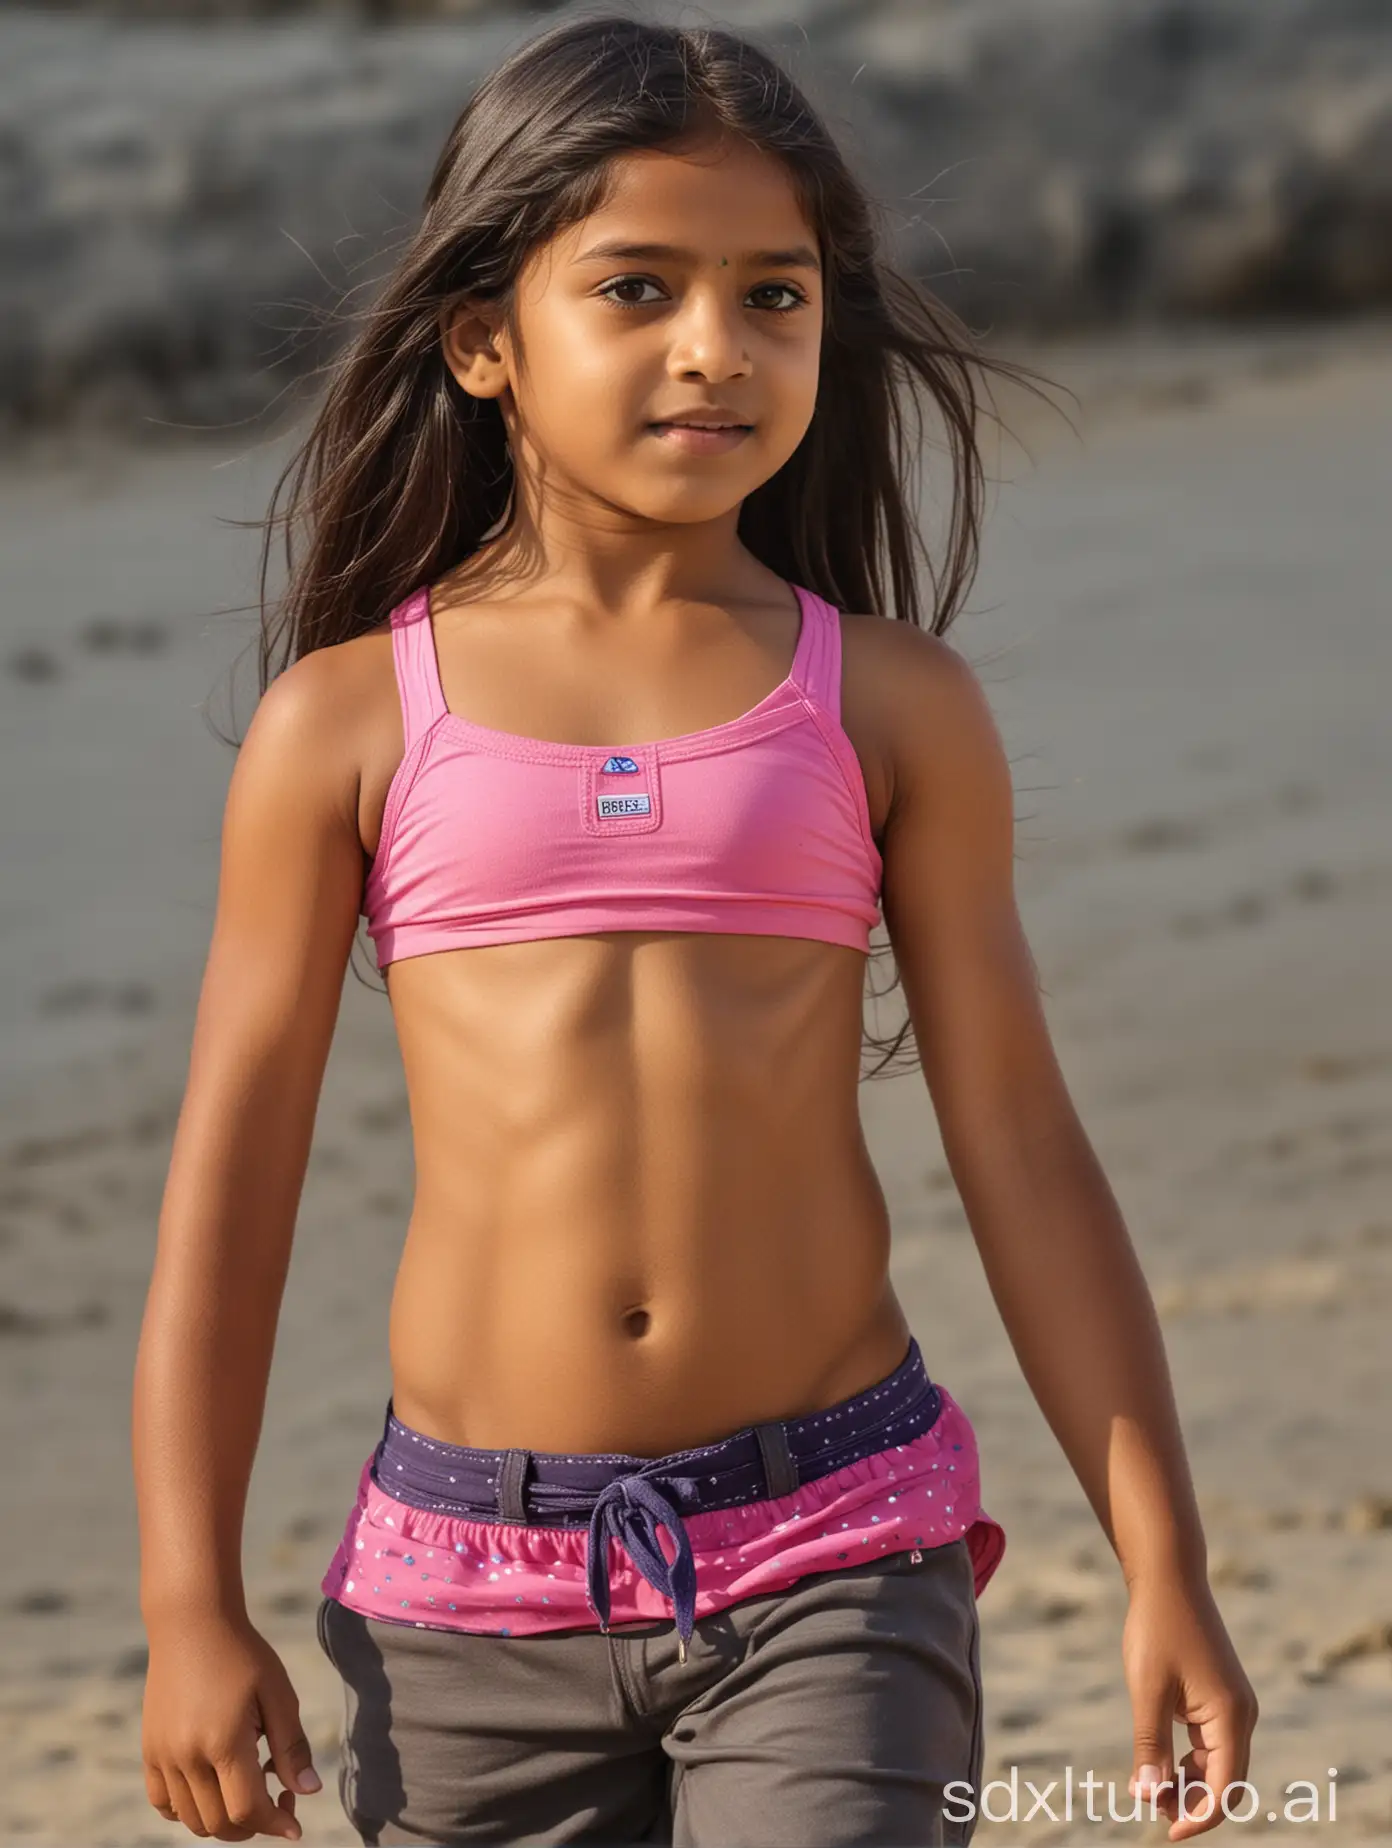 Indian-Girl-with-Muscular-Abs-Enjoying-Beach-in-India